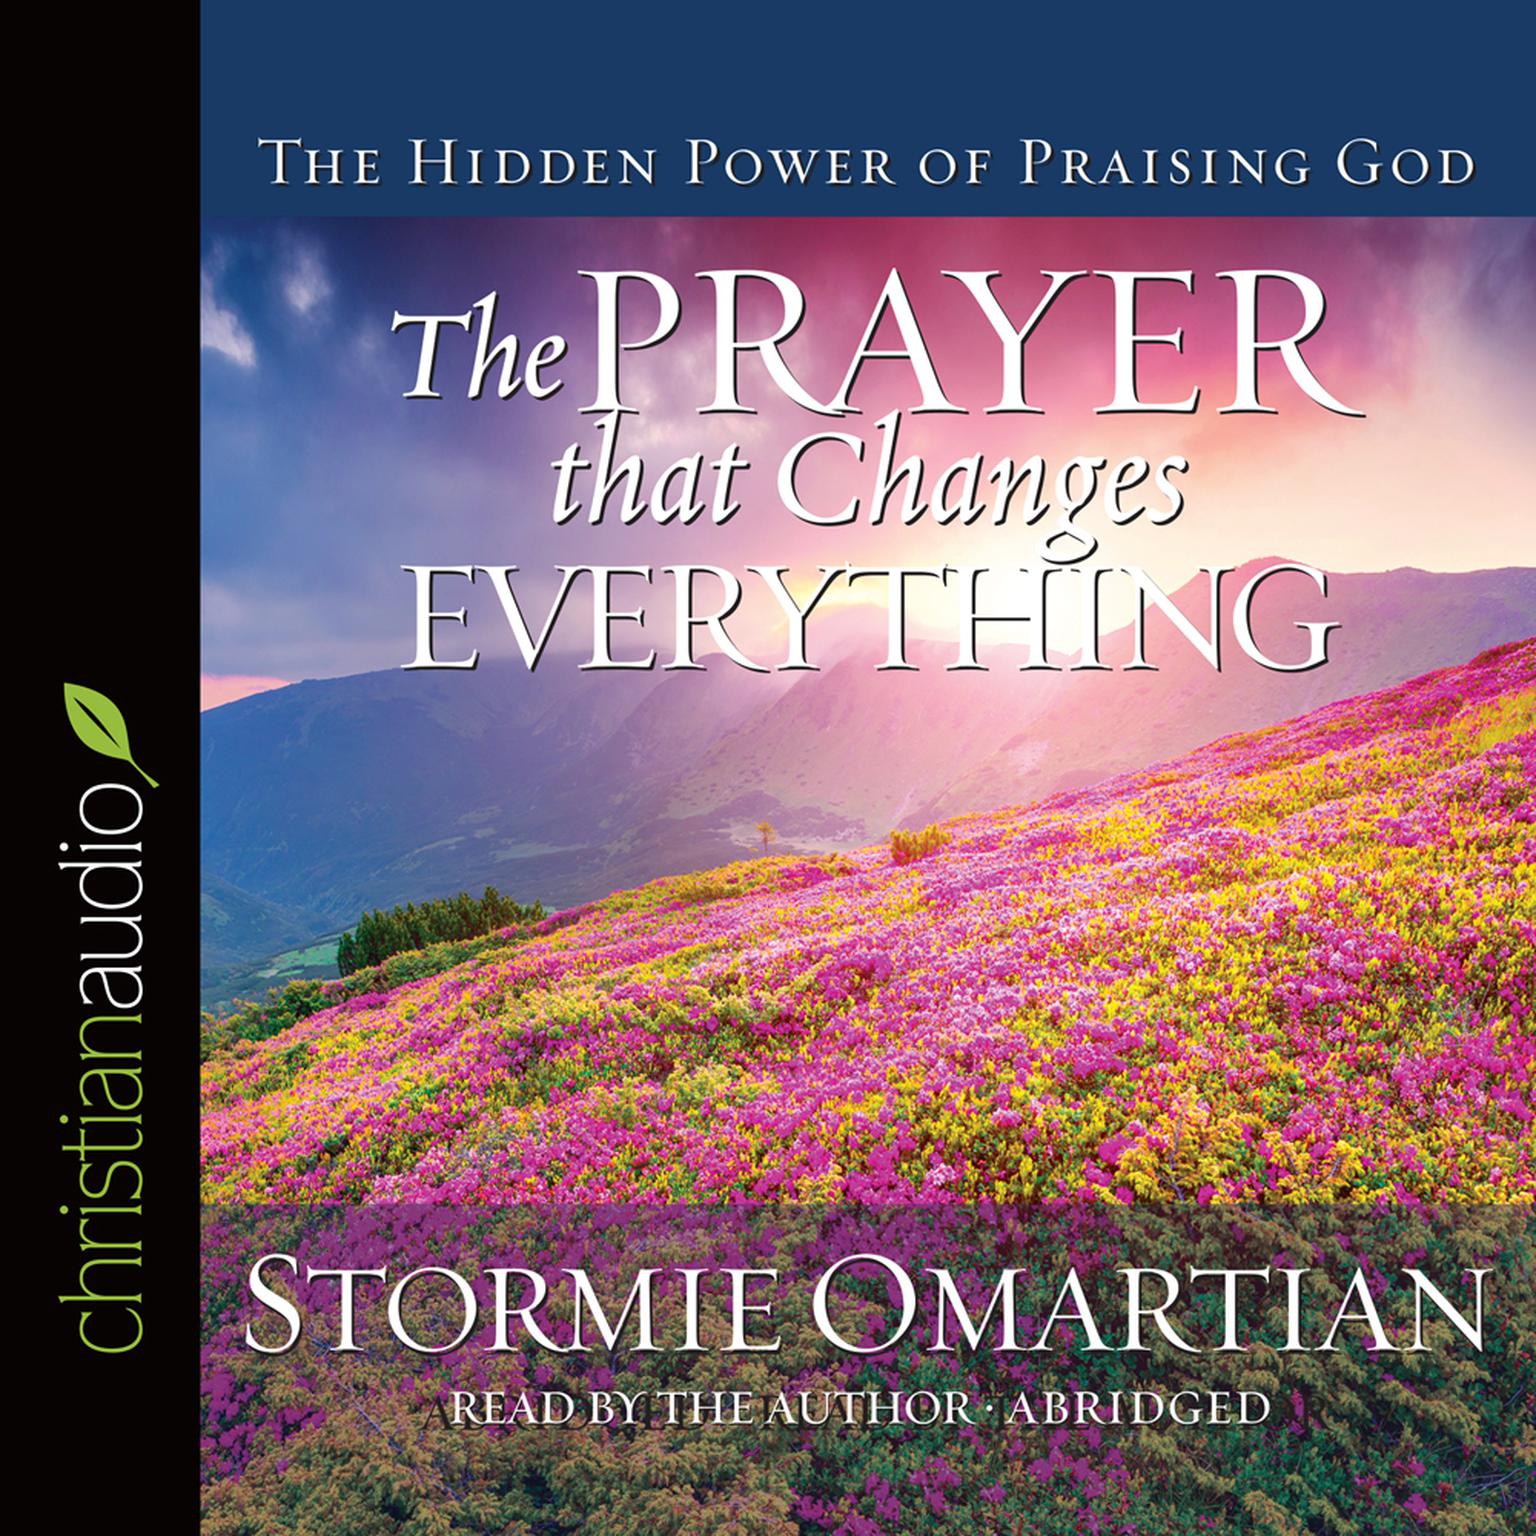 Prayer that Changes Everything (Abridged): The Hidden Power of Praising God Audiobook, by Stormie Omartian